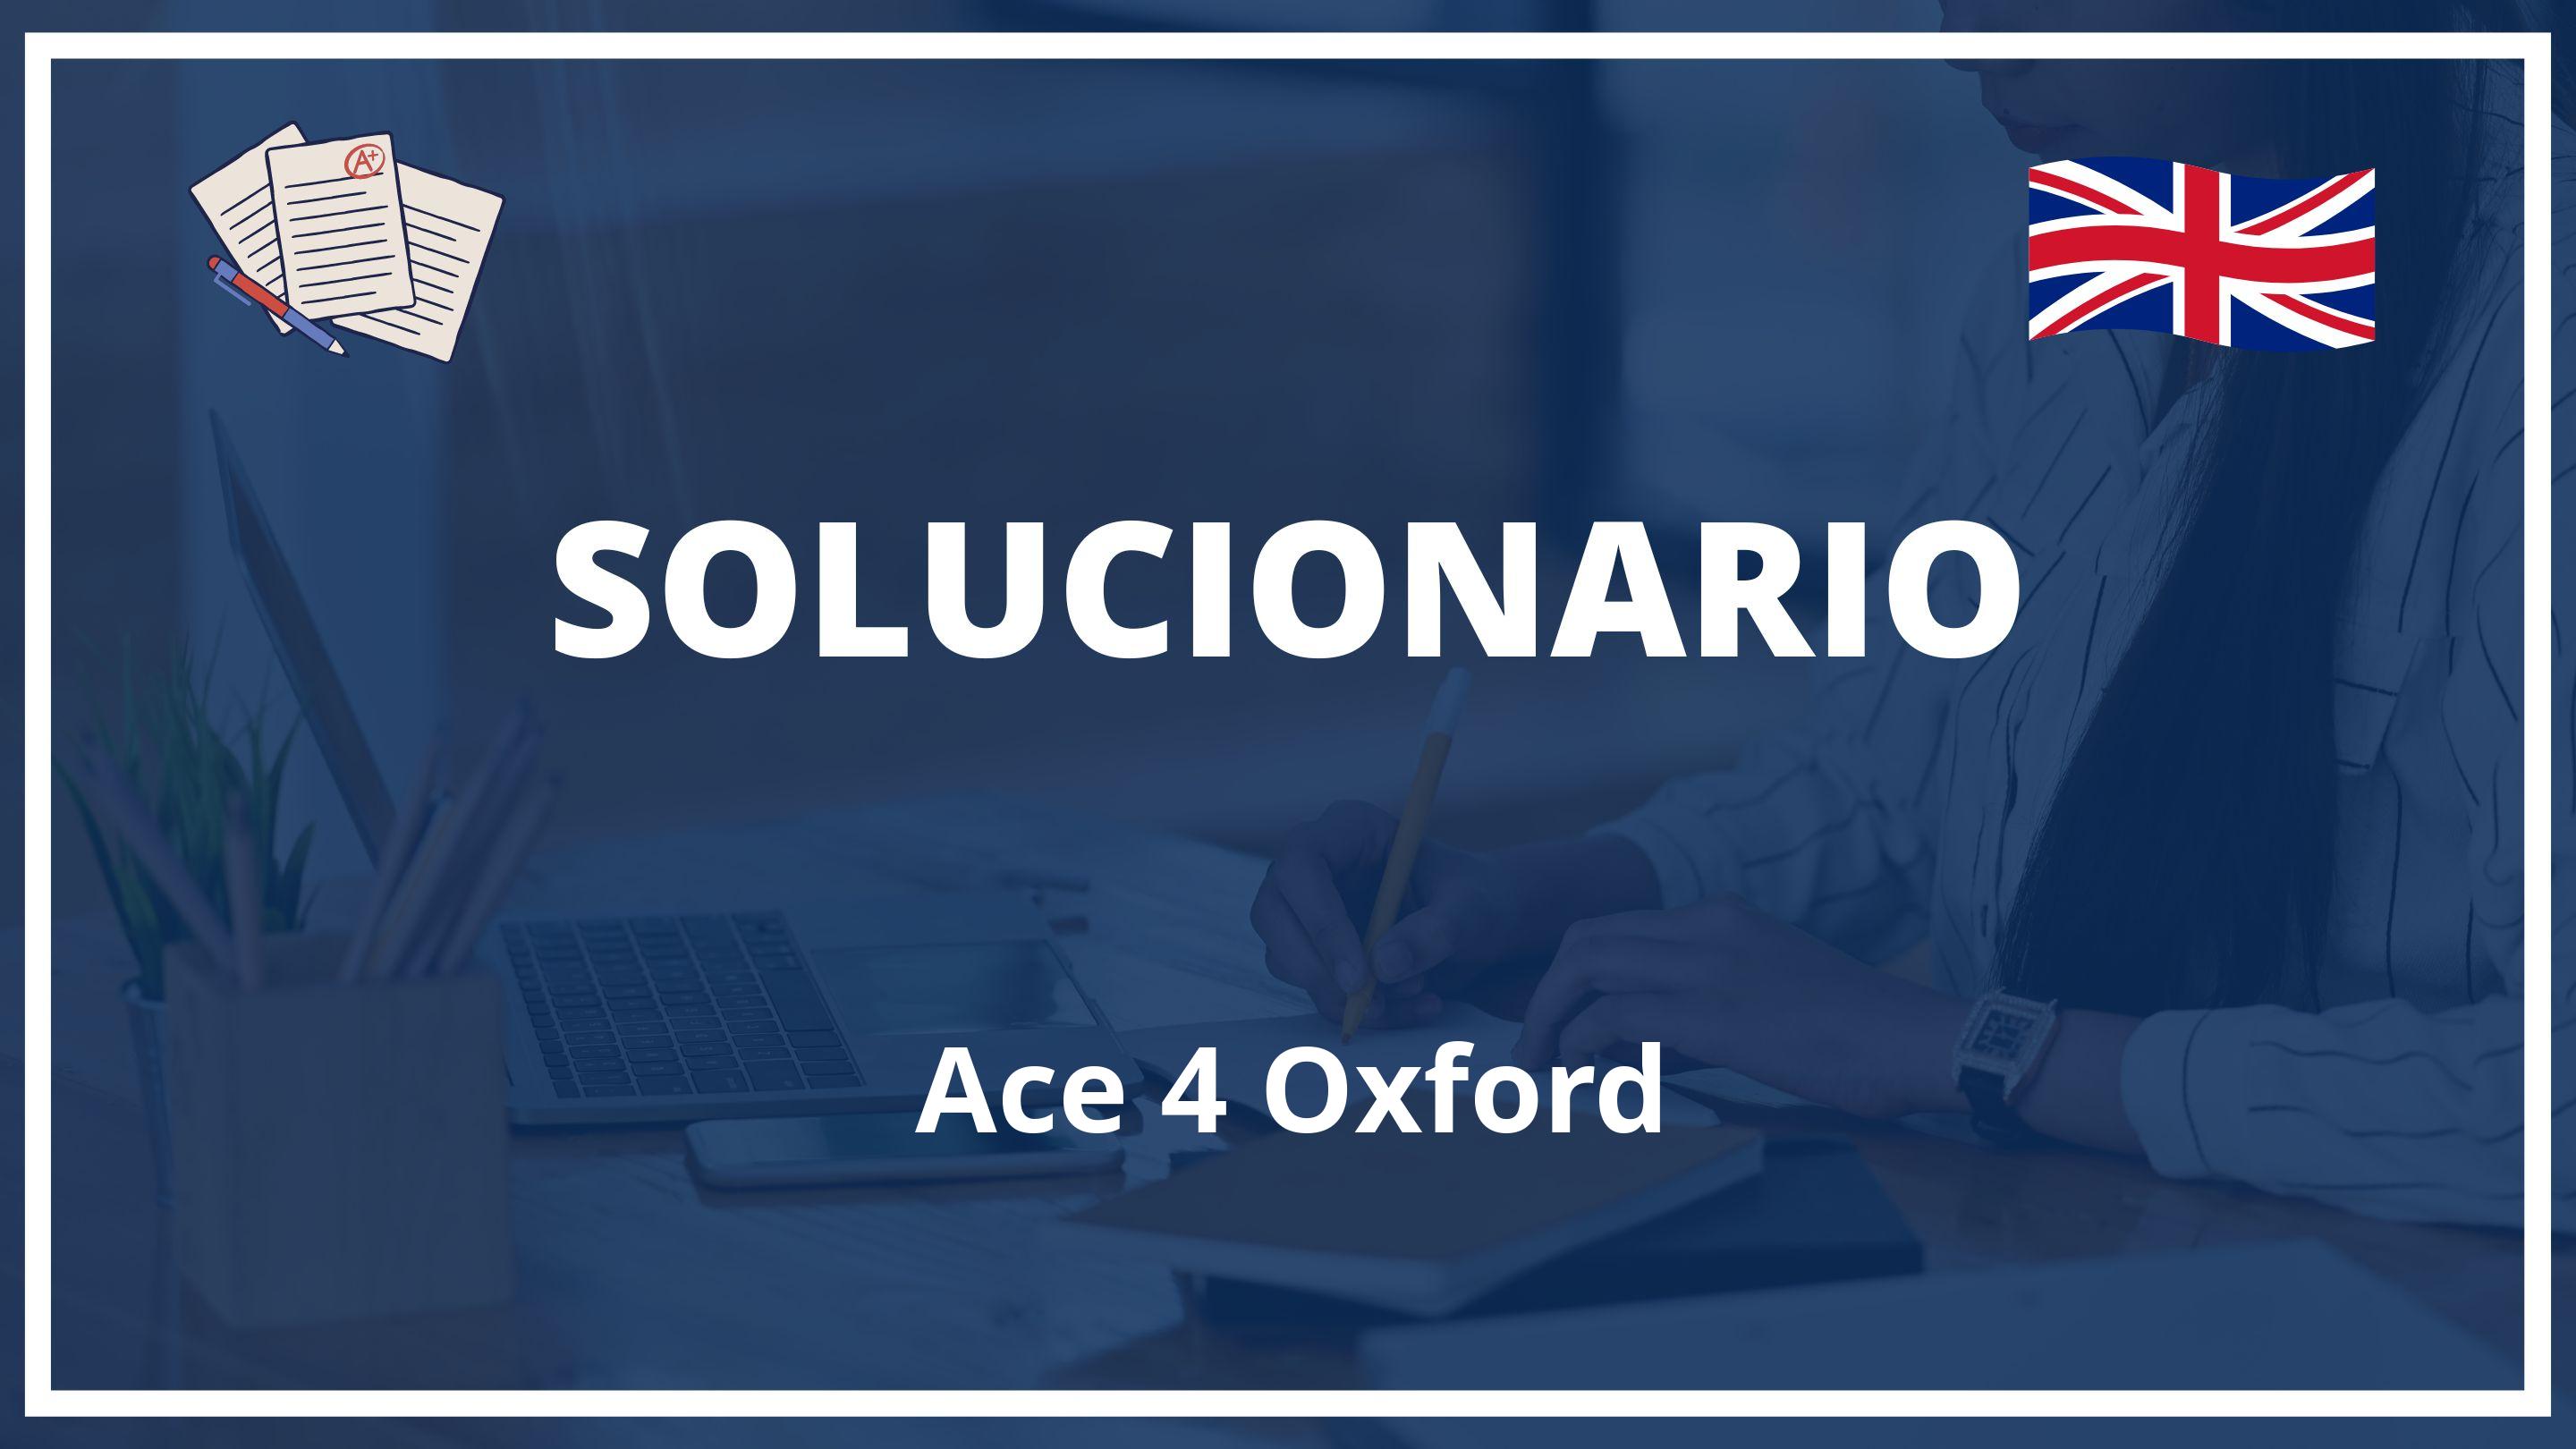 Ace 4 Oxford